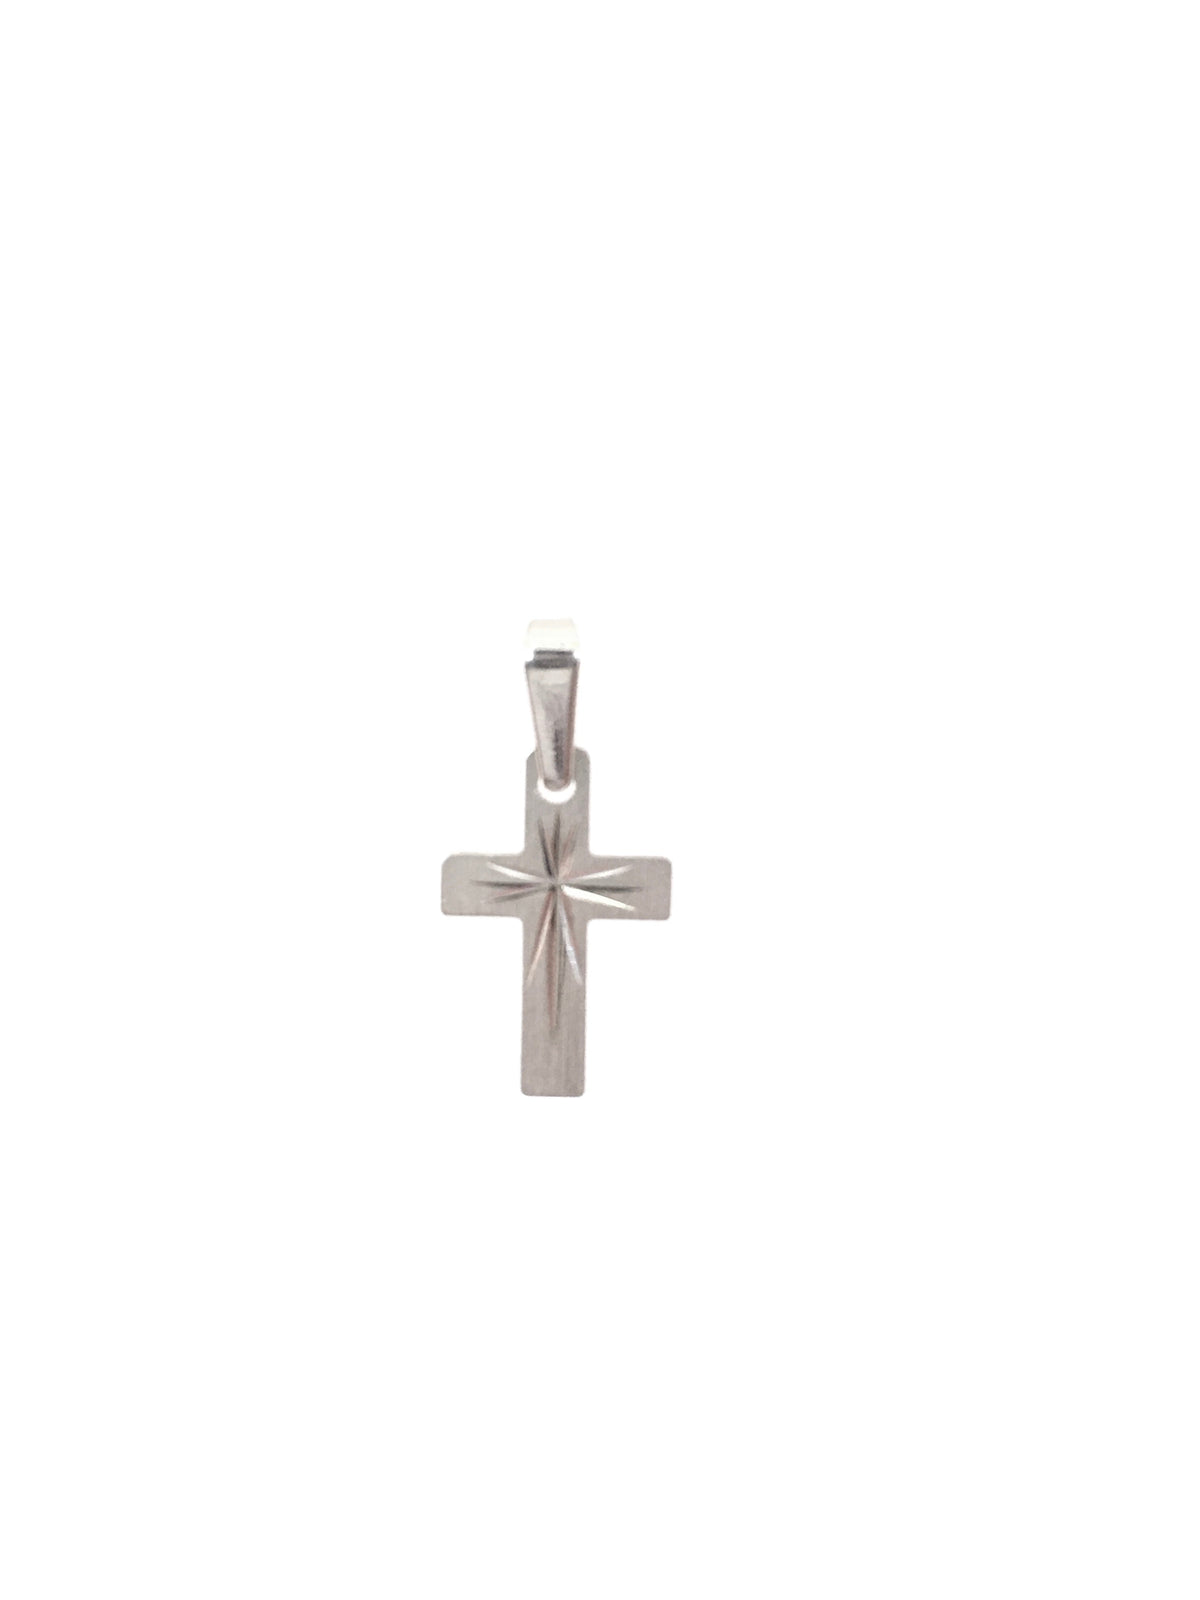 10K White Gold with Etched Center Cross Charm - 20mm x 10mm